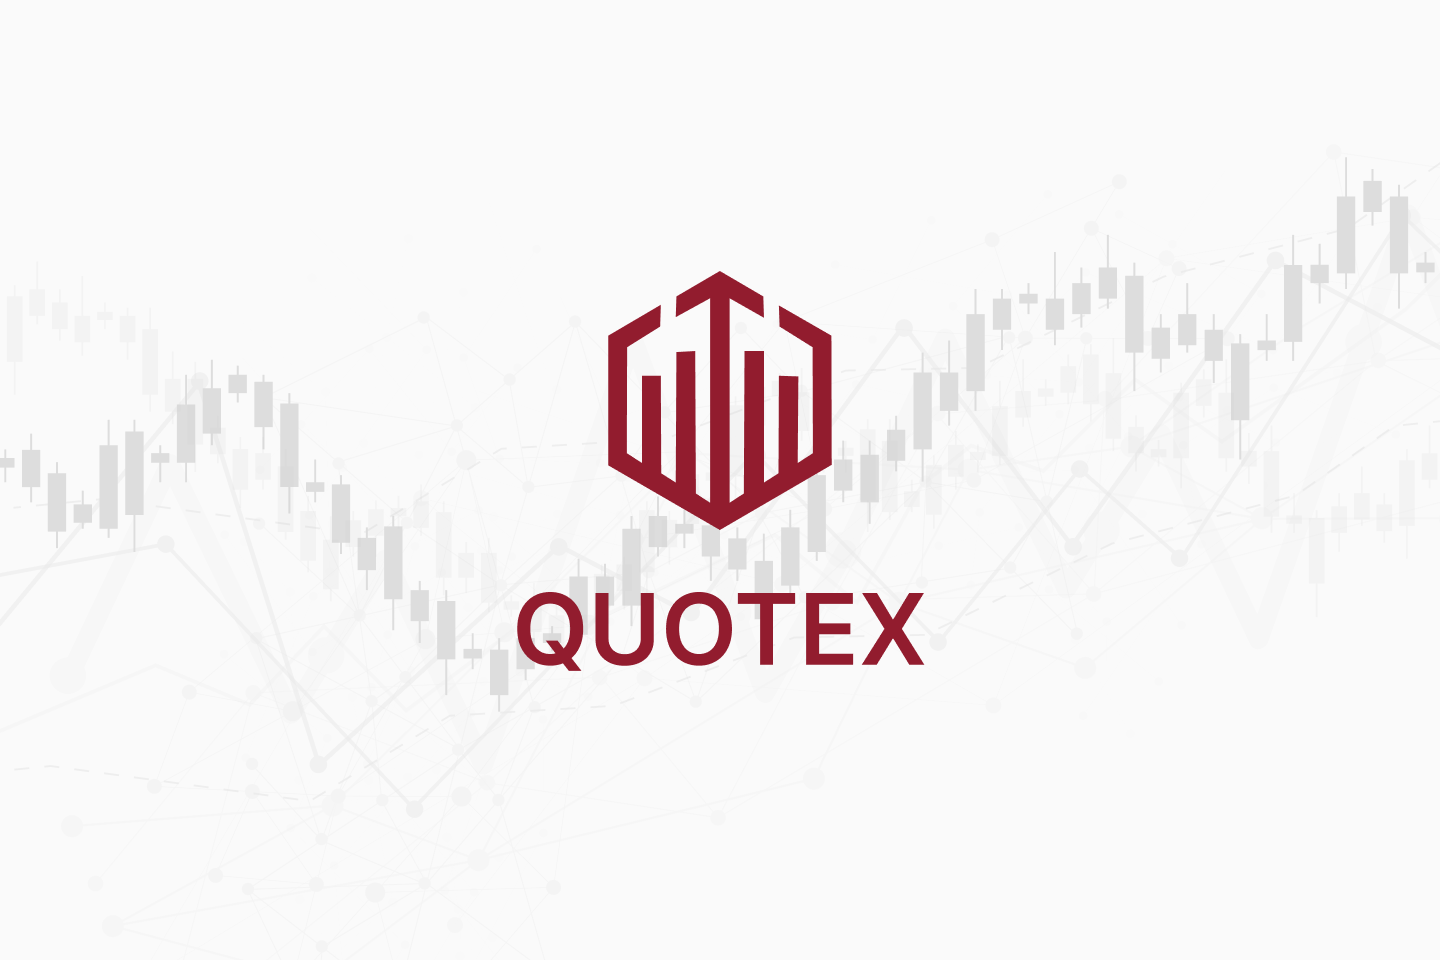 Quotex Broker Hosts Webinar on How to Trade Binary Options Successfully